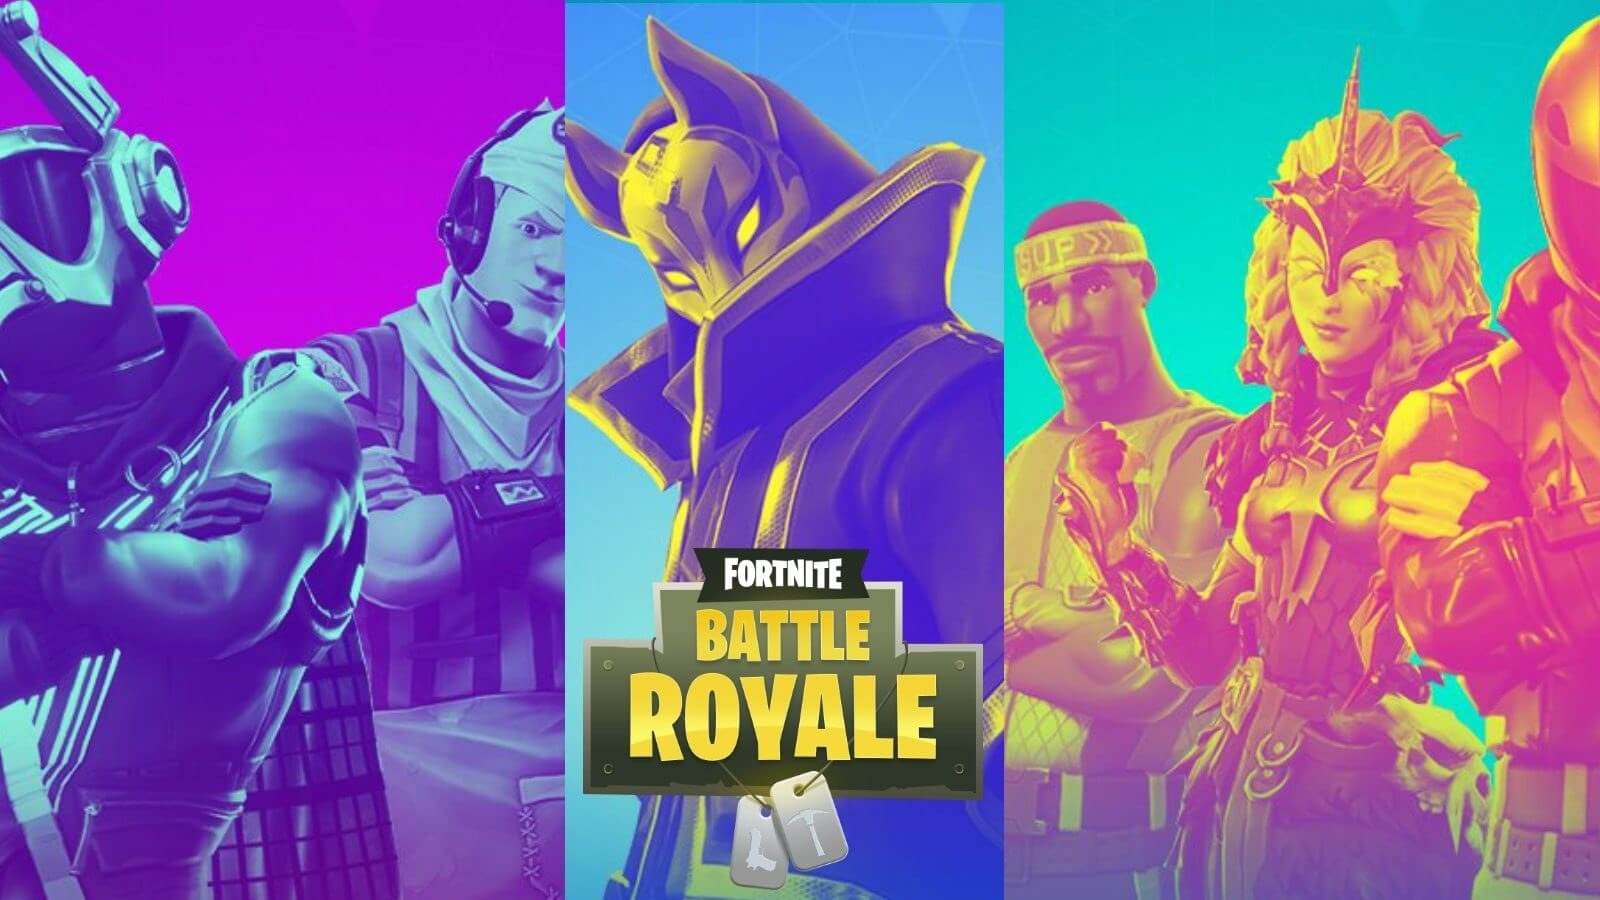 A 'Tournament' mode will be added to Fortnite with tomorrow's